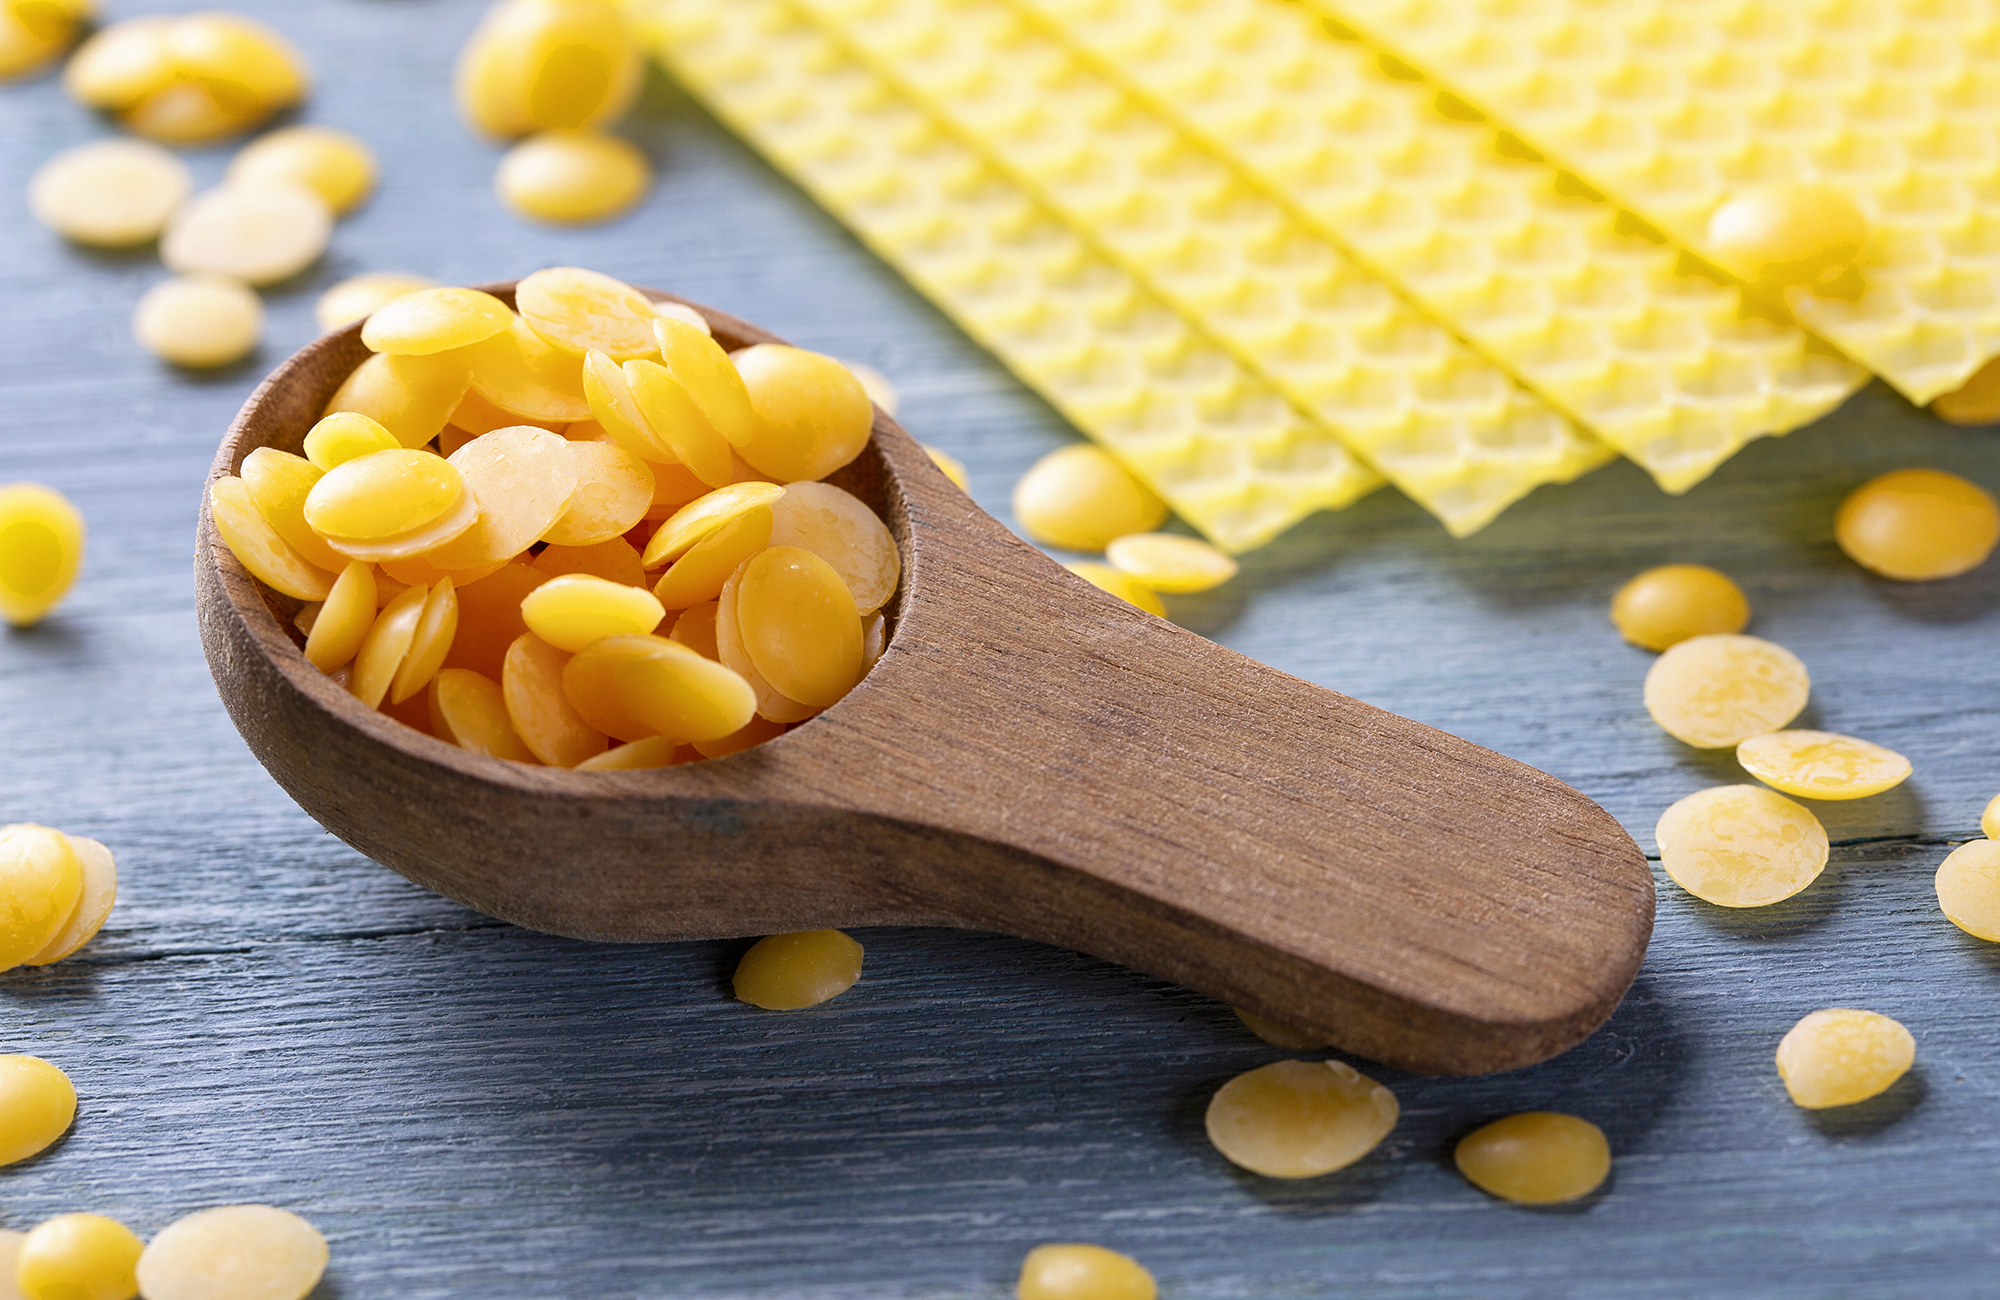 Beeswax For Skin Care: Why It's Great For Dry Skin - Fairy Secrets